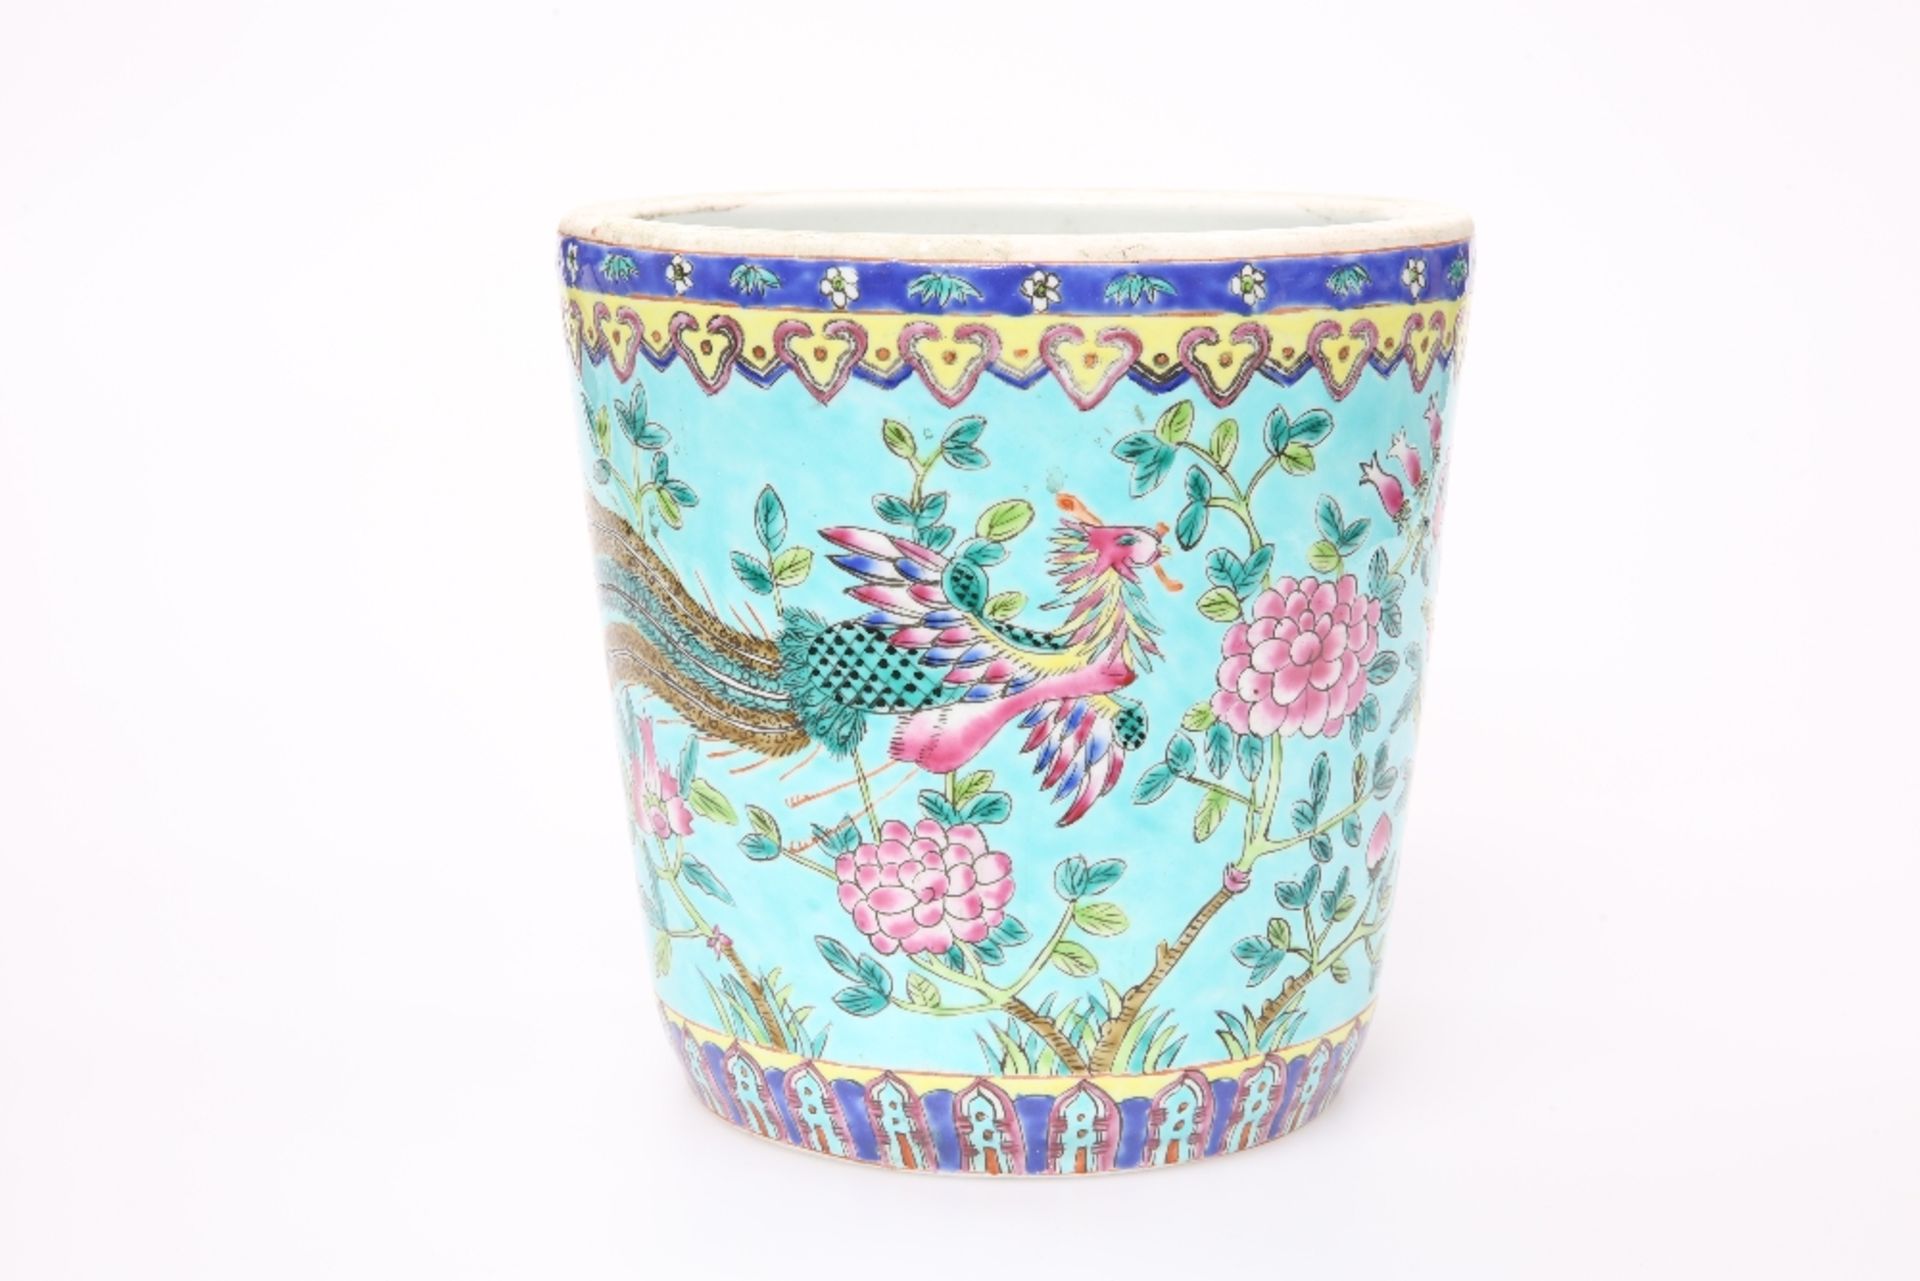 A CHINESE FAMILLE ROSE PORCELAIN JARDINIERE - Image 2 of 3